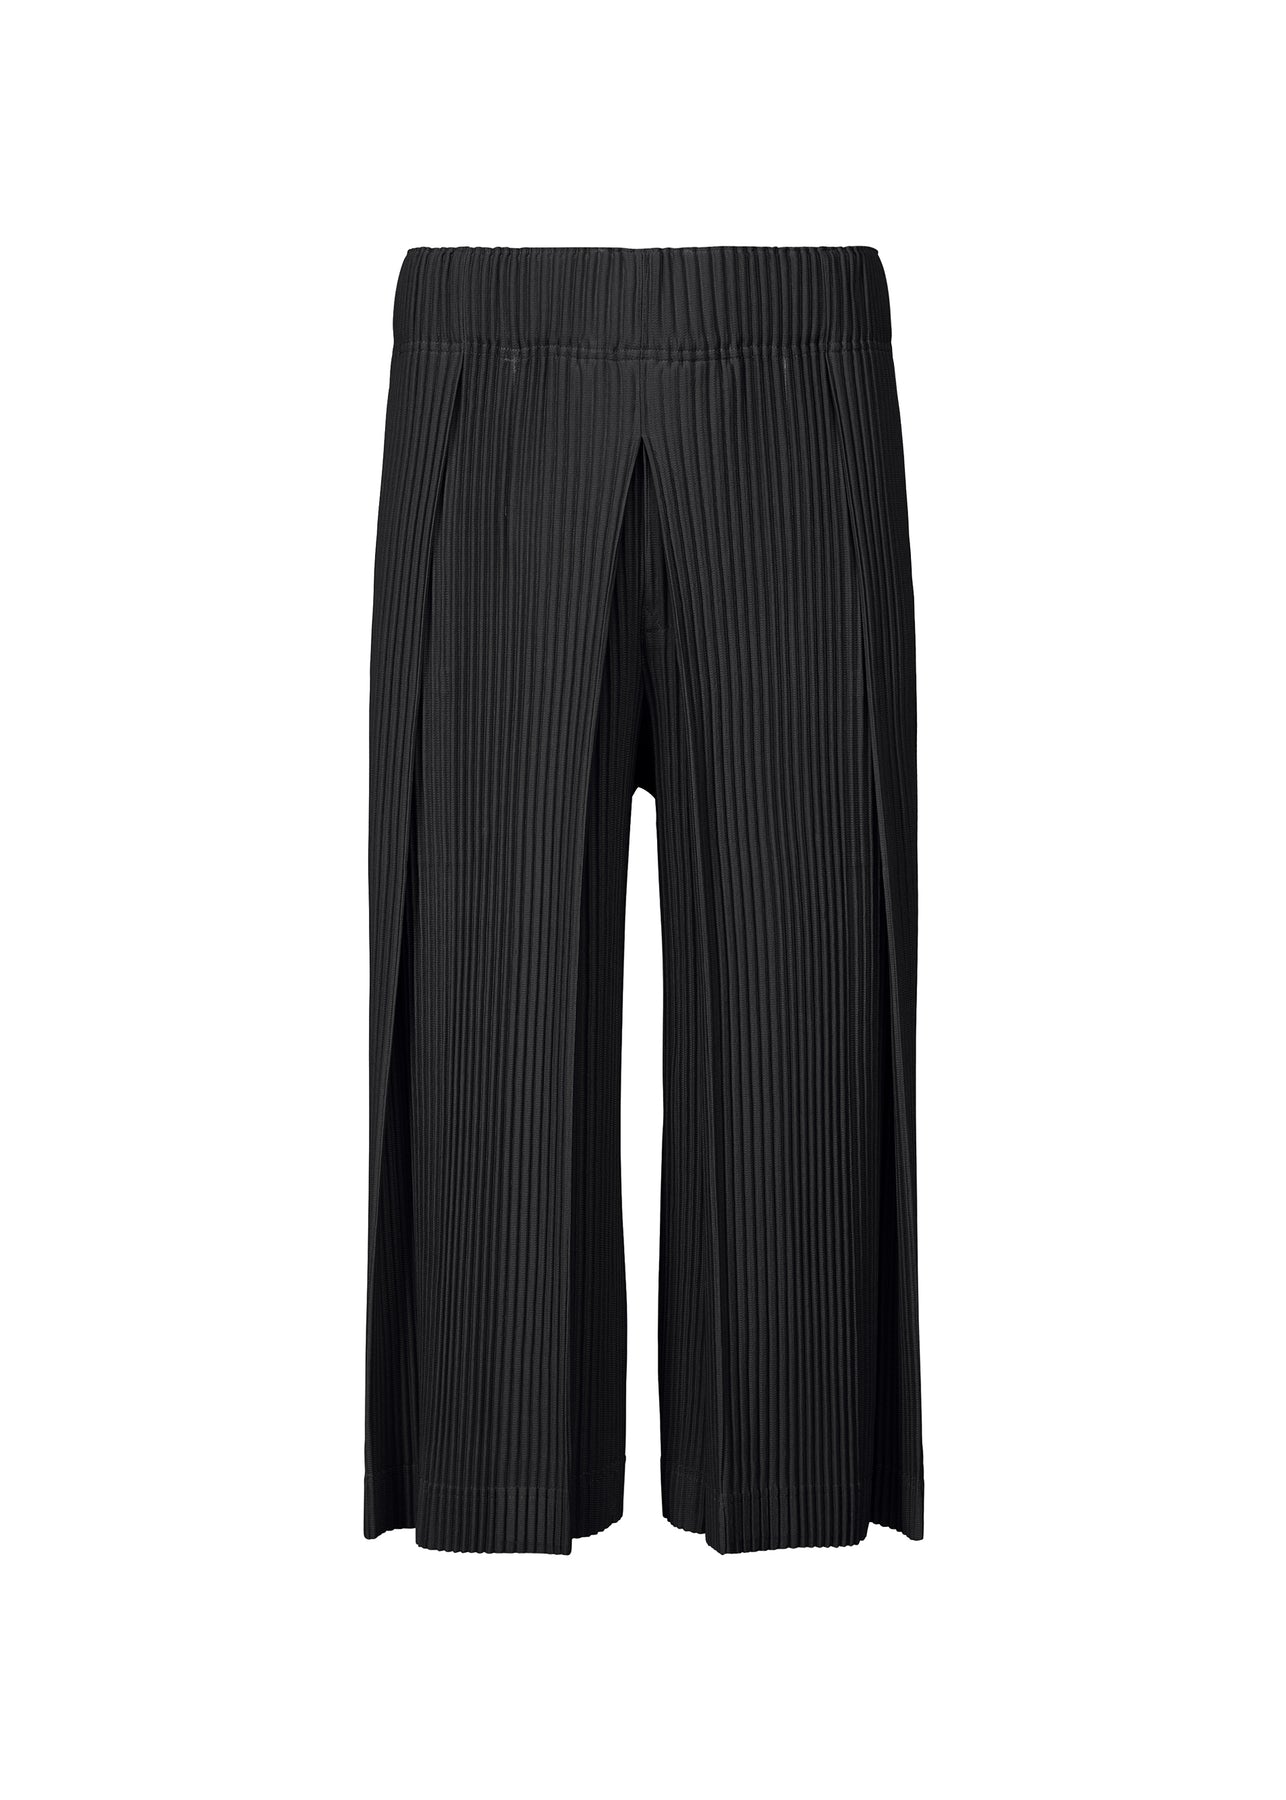 | PLEATS ISSEY PANTS 1 official MIYAKE STORE The ONLINE USA MIYAKE | BOTTOMS ISSEY